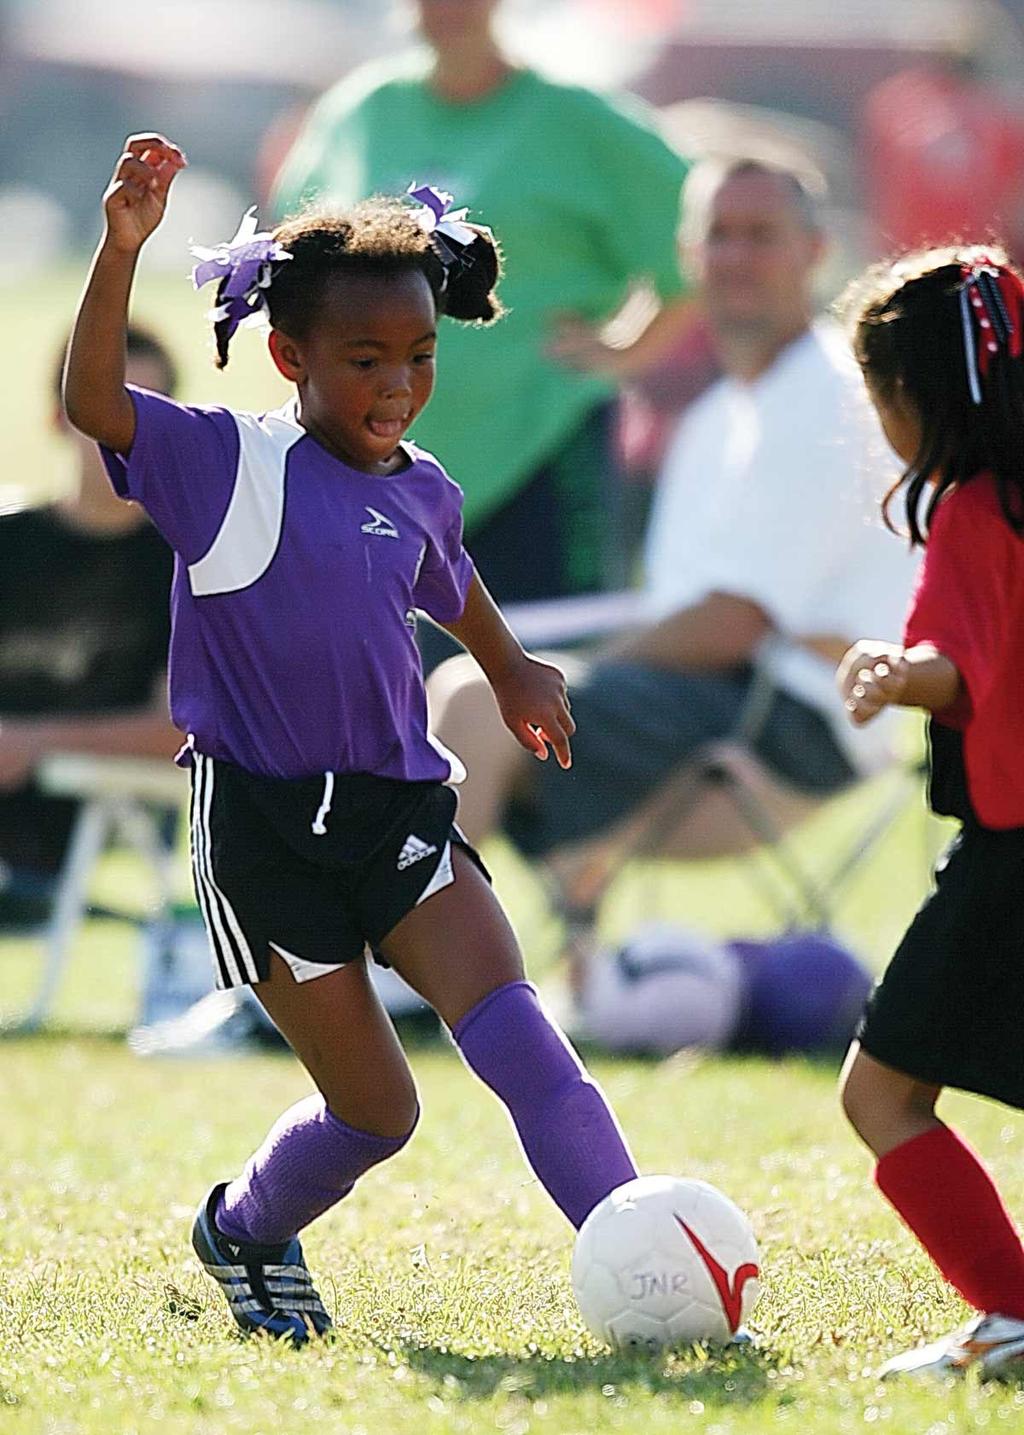 AYSO Philosophies: Open Registration Our program is open to all children who want to register and play soccer.